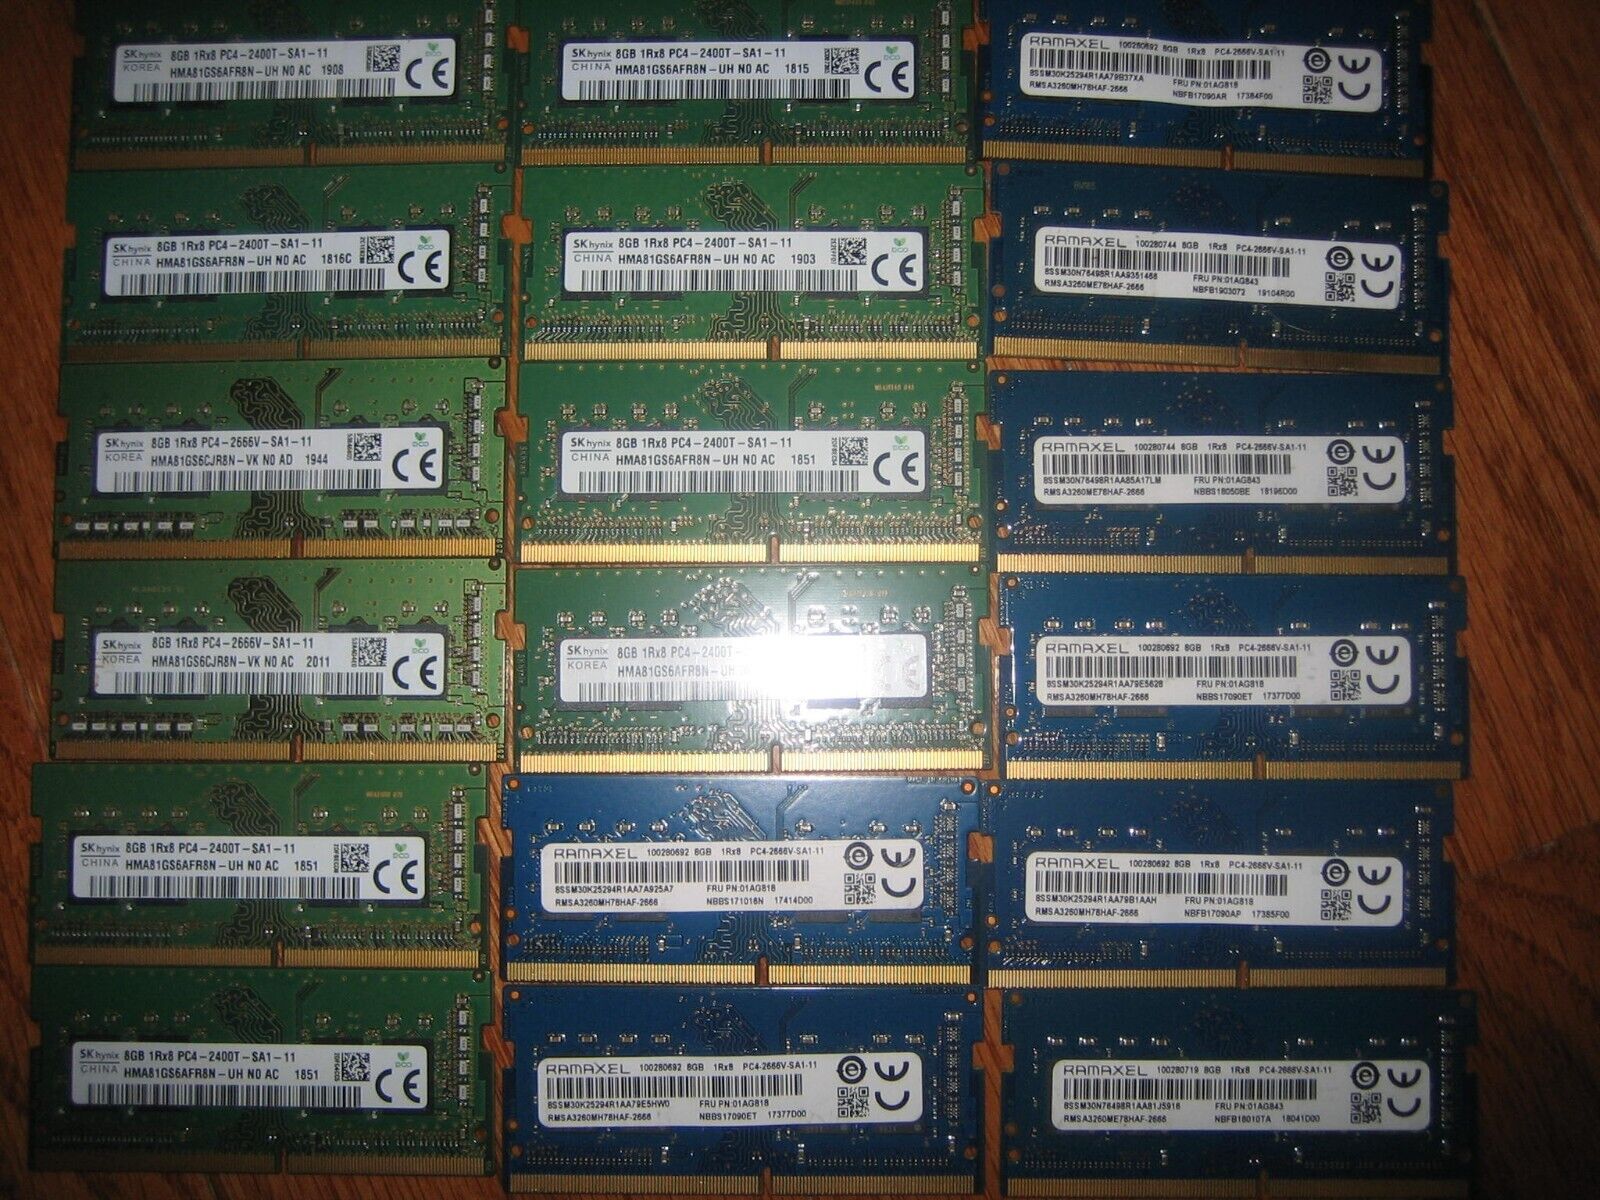 Lot of 18 8GB 1Rx8 PC4-2400T/2666V DDR4 SODIMM Memory For Laptops